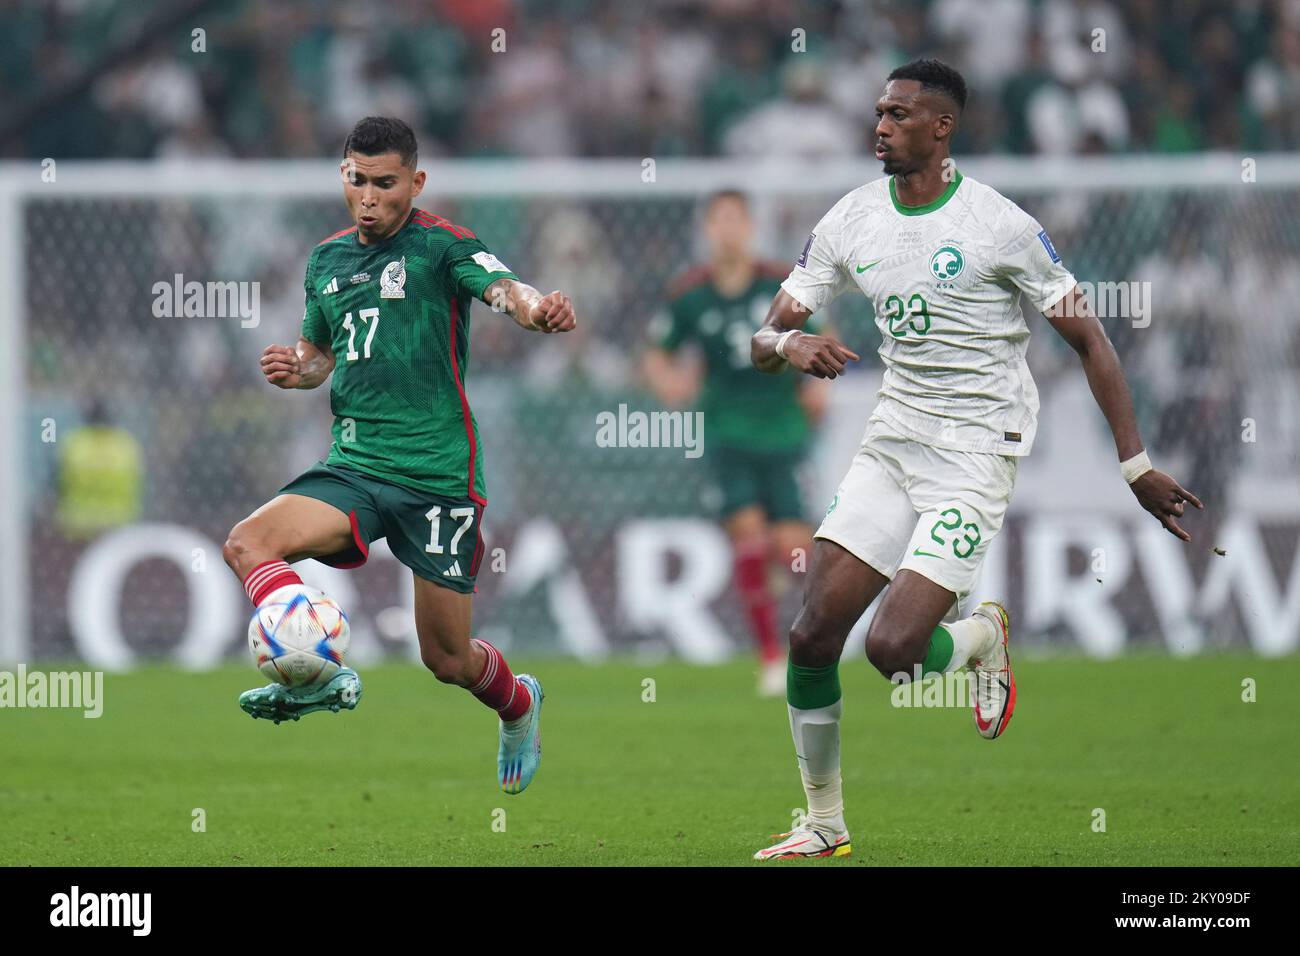 Lusail, Qatar. 30th Nov, 2022. Orbelin Pineda (L) of Mexico vies with Mohamed Kanno of Saudi Arabia during the Group C match between Saudi Arabia and Mexico at the 2022 FIFA World Cup at Lusail Stadium in Lusail, Qatar, Nov. 30, 2022. Credit: Meng Dingbo/Xinhua/Alamy Live News Stock Photo